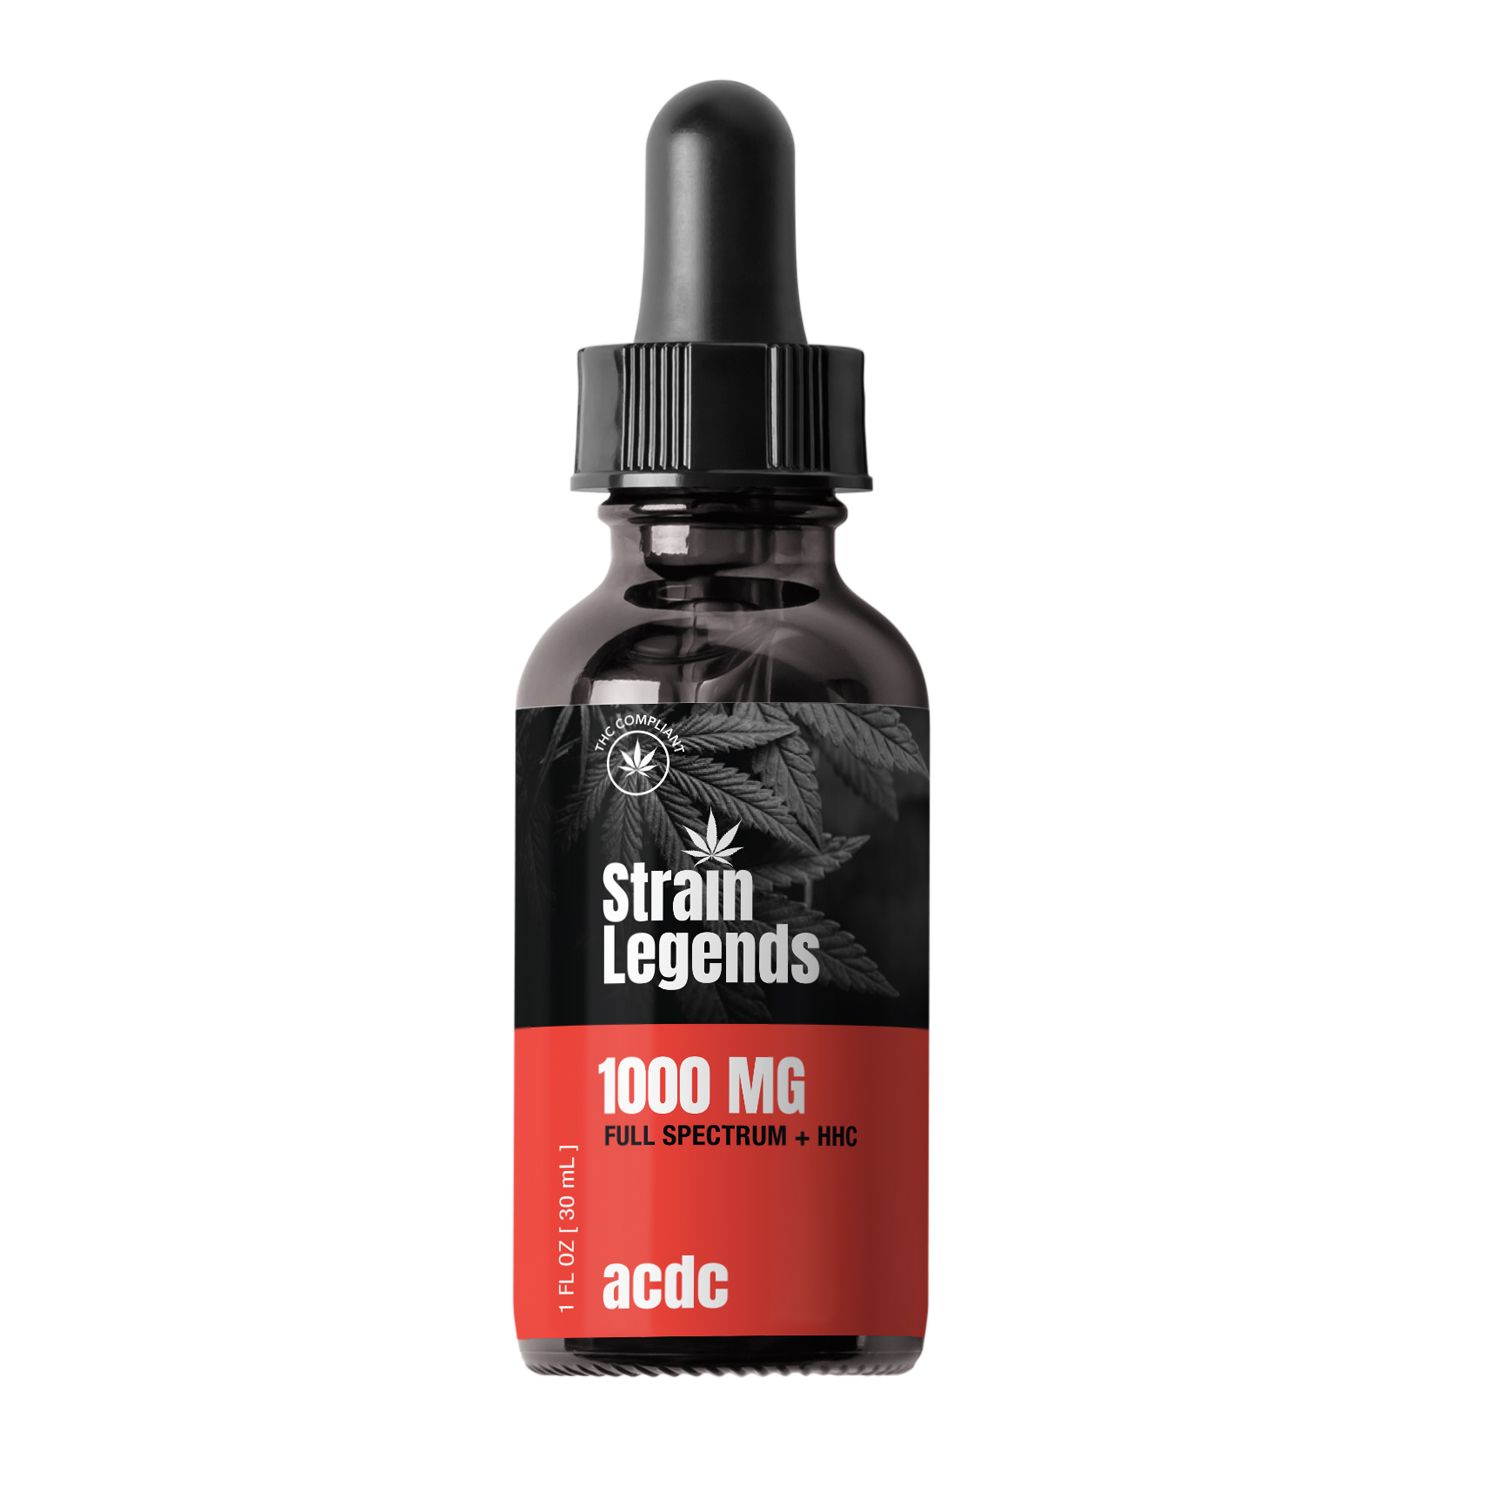 Strain-Legends-1000mg-Tincture-ACDC